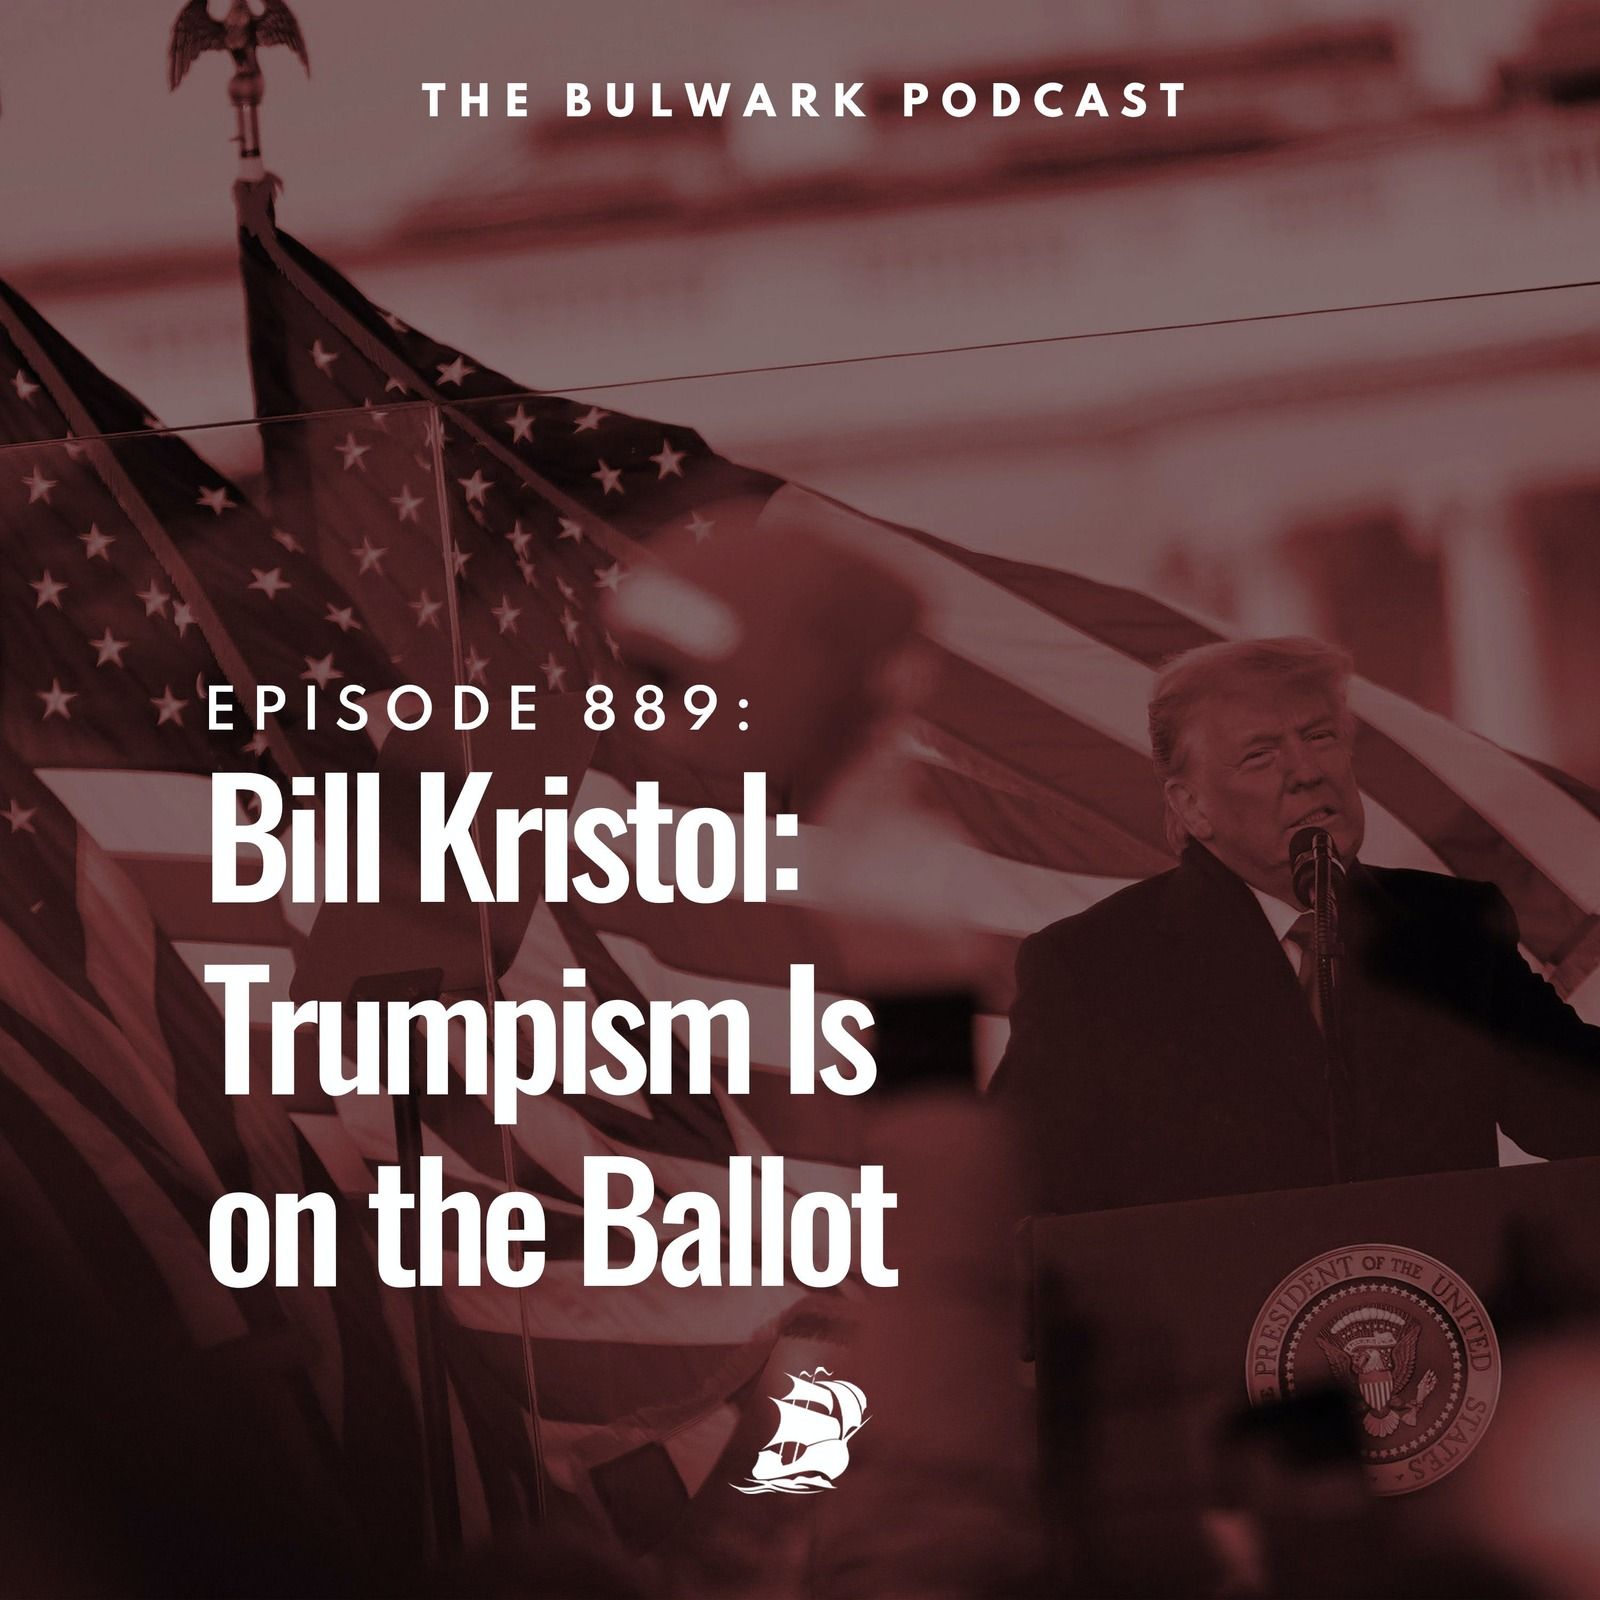 Bill Kristol: Trumpism Is on the Ballot by The Bulwark Podcast